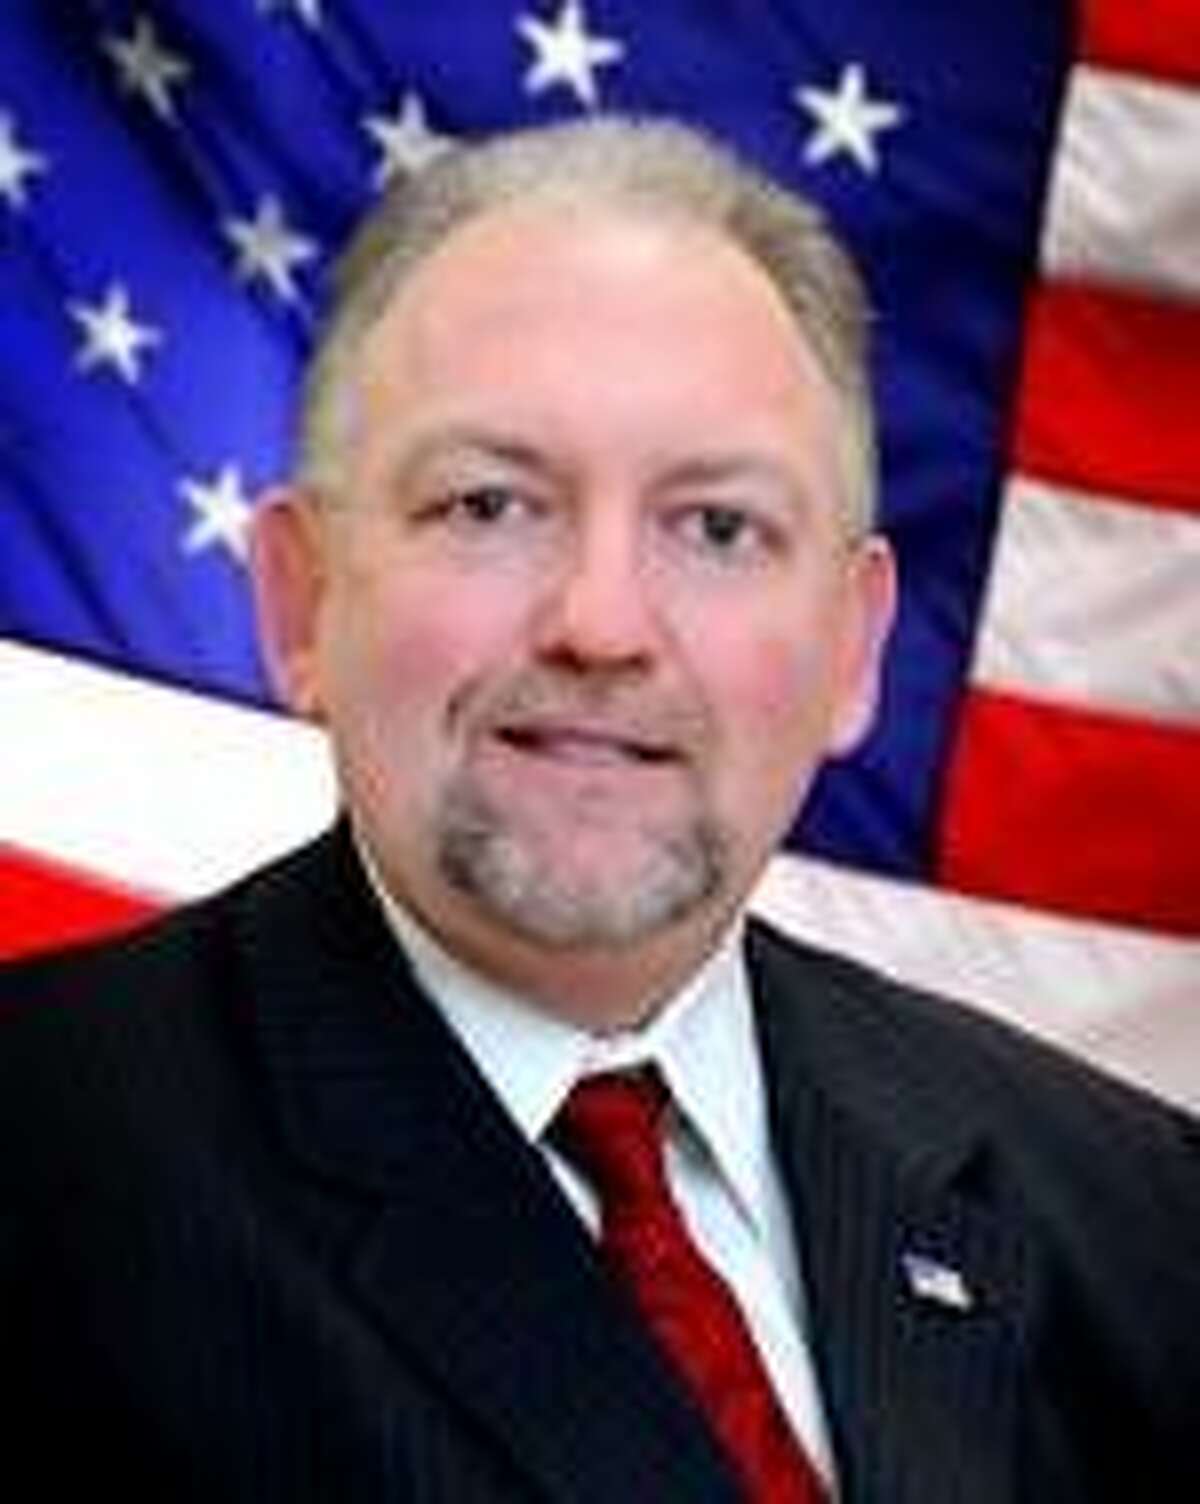 Kerrville City Councilman Gene Allen announced he would resign his seat mid-way through his fourth term.